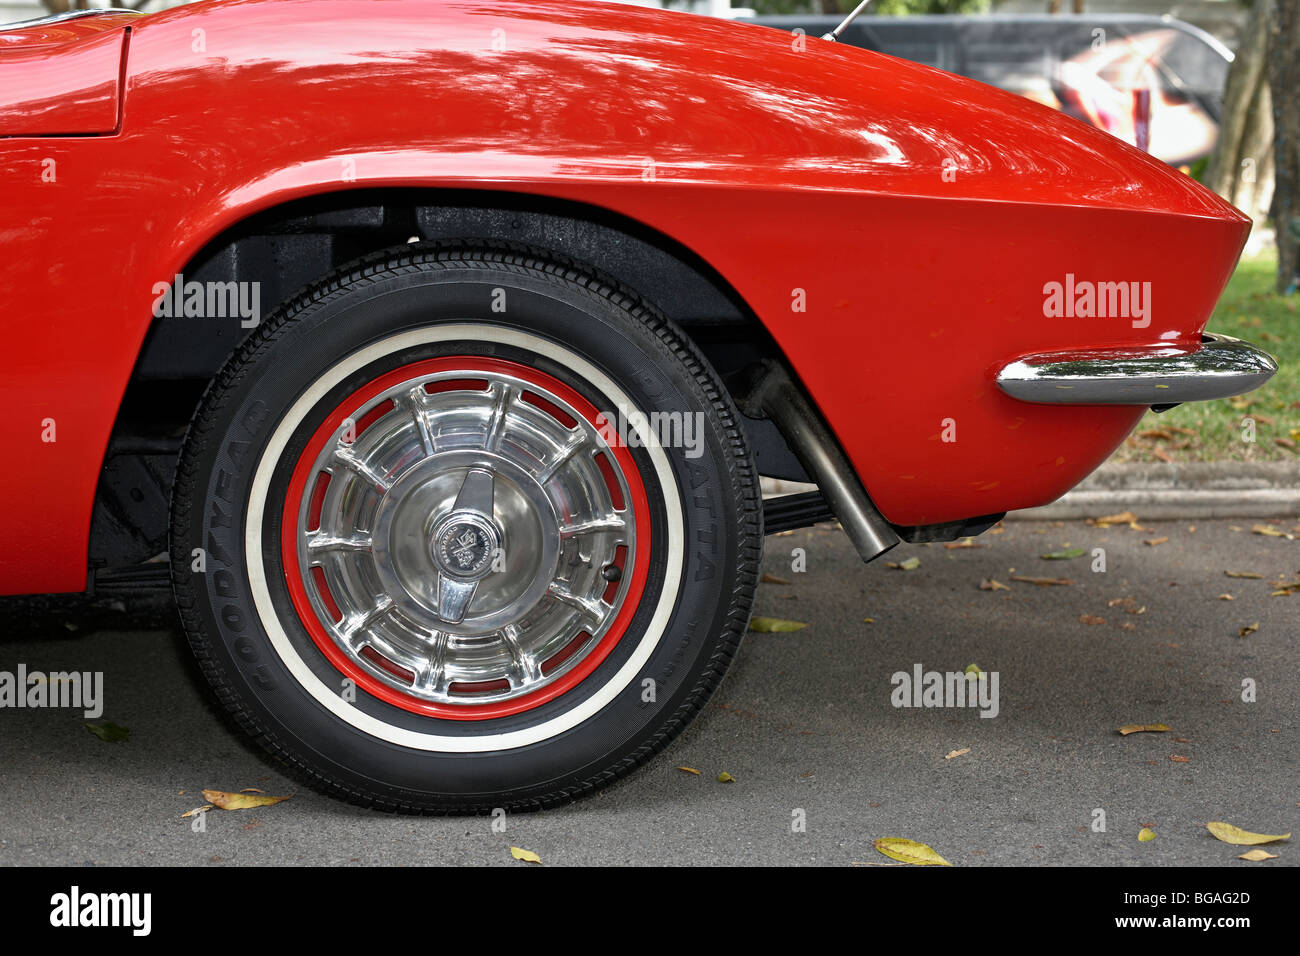 1961 Chevrolet Corvette sports car rear wheel and wing detail Stock Photo